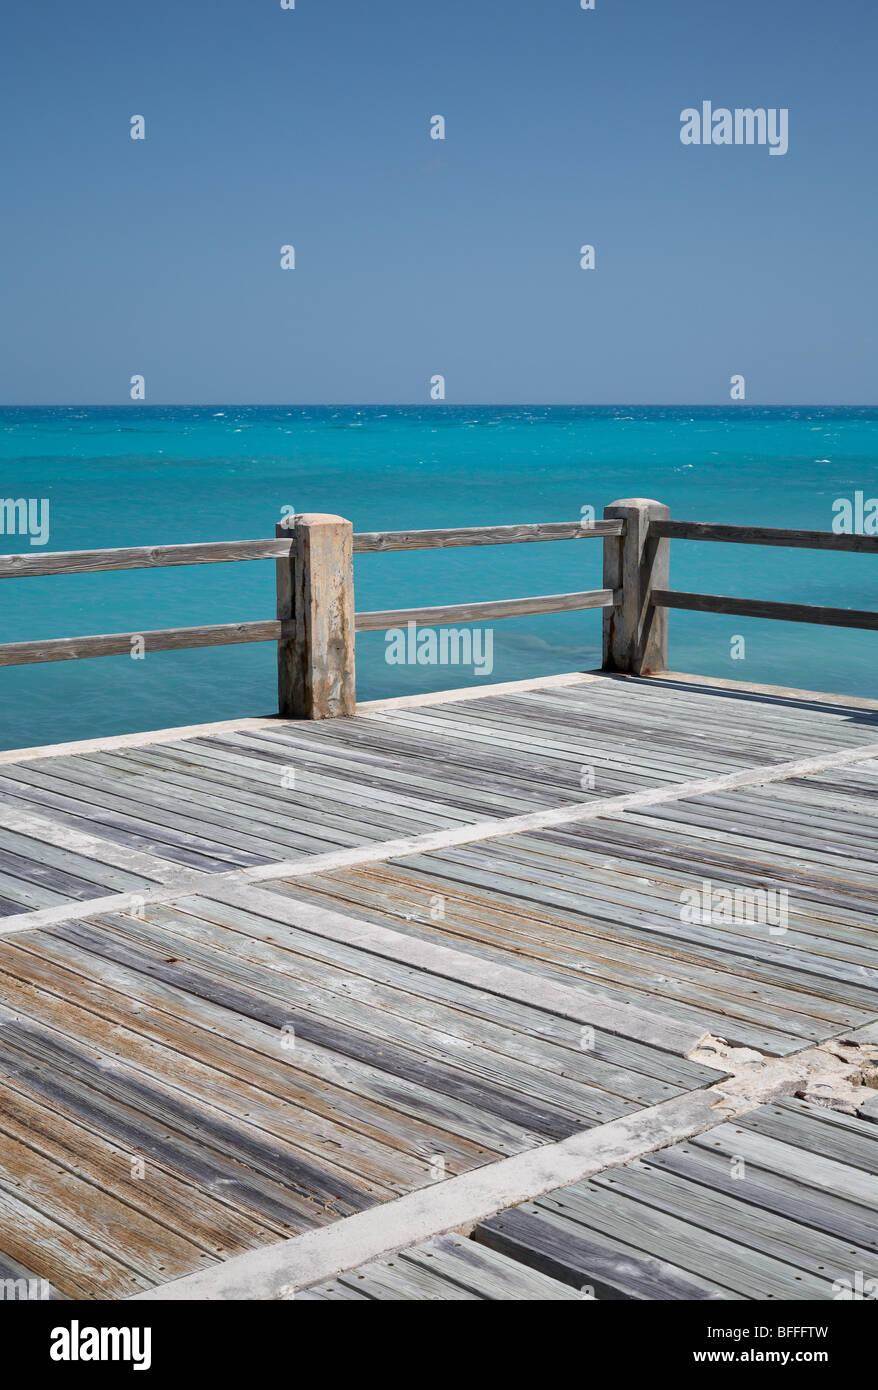 Jetty looking out over turquoise sea, Bermuda Stock Photo